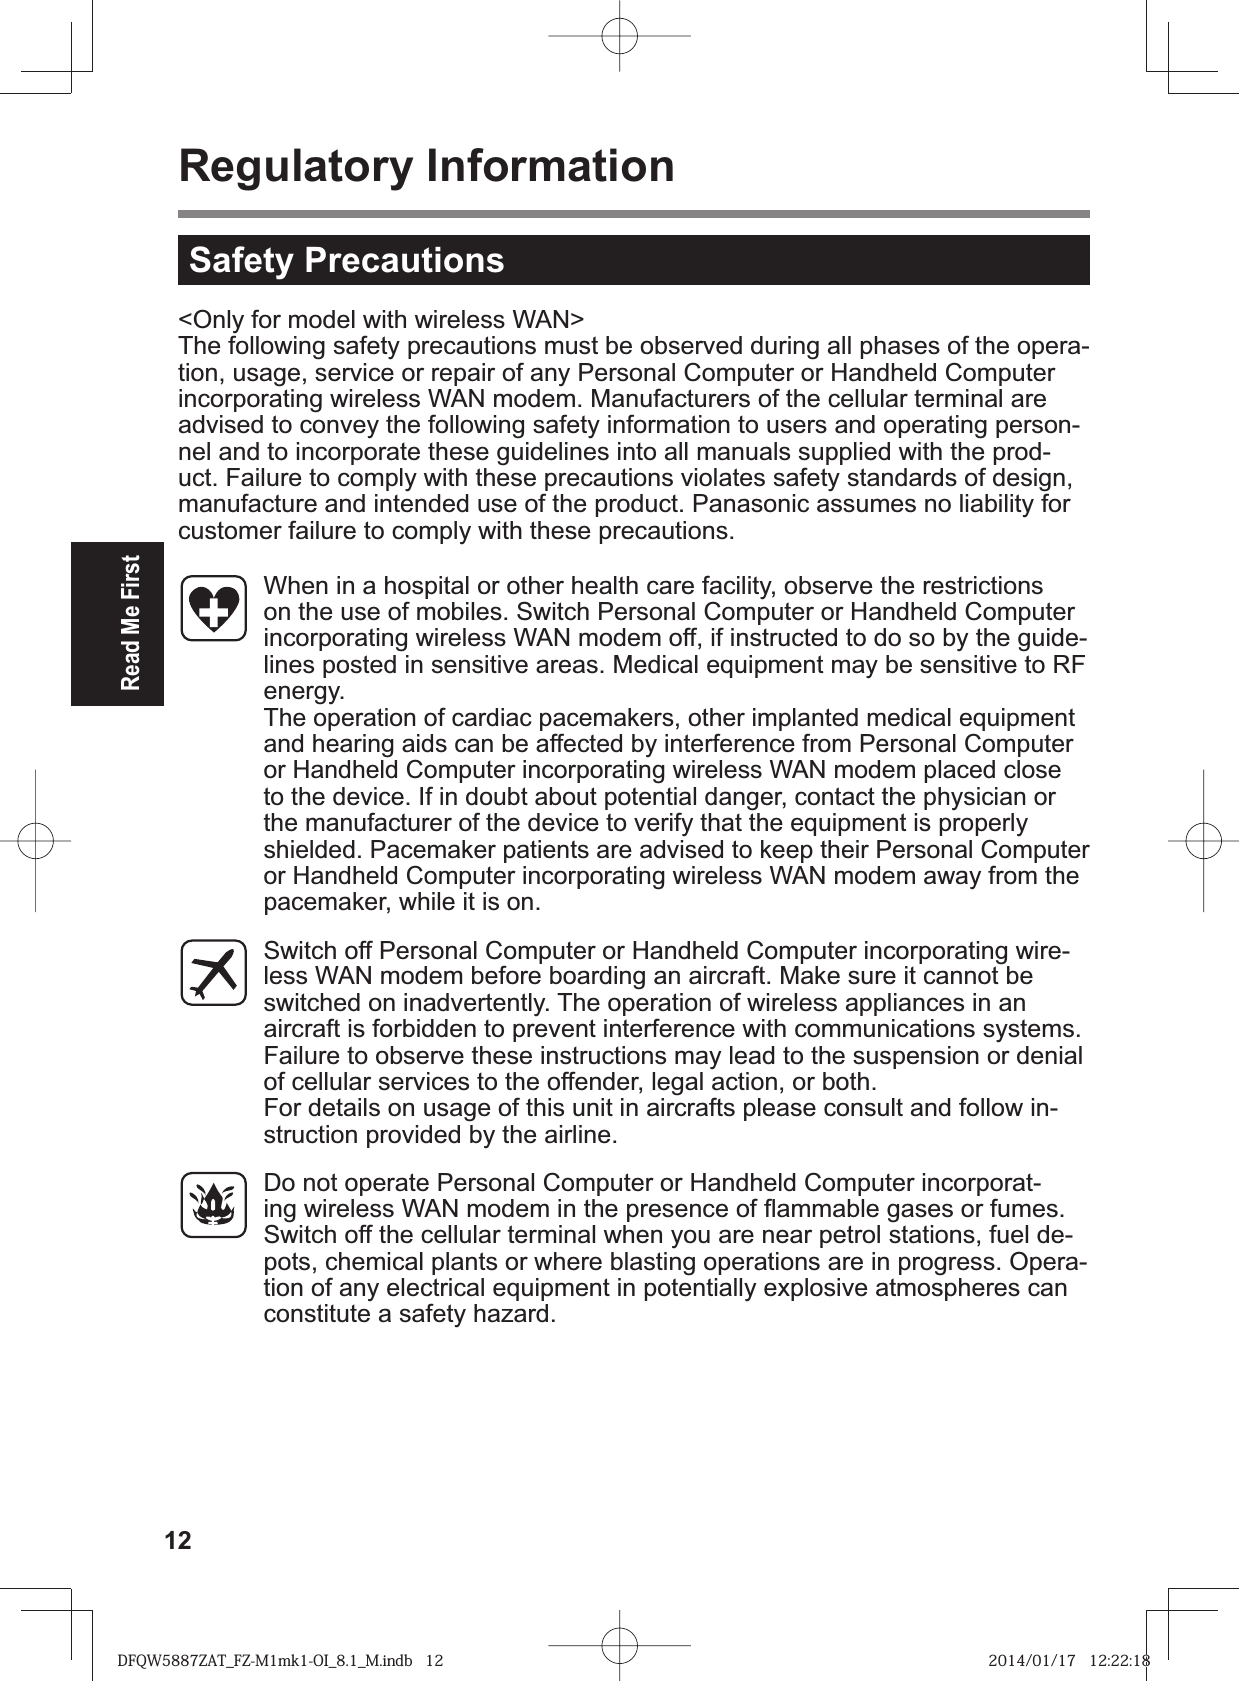 12Read Me FirstRegulatory Information&lt;Only for model with wireless WAN&gt;The following safety precautions must be observed during all phases of the opera-tion, usage, service or repair of any Personal Computer or Handheld Computer incorporating wireless WAN modem. Manufacturers of the cellular terminal are advised to convey the following safety information to users and operating person-nel and to incorporate these guidelines into all manuals supplied with the prod-uct. Failure to comply with these precautions violates safety standards of design, manufacture and intended use of the product. Panasonic assumes no liability for customer failure to comply with these precautions.  When in a hospital or other health care facility, observe the restrictions on the use of mobiles. Switch Personal Computer or Handheld Computer incorporating wireless WAN modem off, if instructed to do so by the guide-lines posted in sensitive areas. Medical equipment may be sensitive to RF energy.  The operation of cardiac pacemakers, other implanted medical equipment and hearing aids can be affected by interference from Personal Computer or Handheld Computer incorporating wireless WAN modem placed close to the device. If in doubt about potential danger, contact the physician or the manufacturer of the device to verify that the equipment is properly shielded. Pacemaker patients are advised to keep their Personal Computer or Handheld Computer incorporating wireless WAN modem away from the pacemaker, while it is on.  Switch off Personal Computer or Handheld Computer incorporating wire-less WAN modem before boarding an aircraft. Make sure it cannot be switched on inadvertently. The operation of wireless appliances in an aircraft is forbidden to prevent interference with communications systems. Failure to observe these instructions may lead to the suspension or denial of cellular services to the offender, legal action, or both.For details on usage of this unit in aircrafts please consult and follow in-struction provided by the airline.  Do not operate Personal Computer or Handheld Computer incorporat-ing wireless WAN modem in the presence of ß ammable gases or fumes. Switch off the cellular terminal when you are near petrol stations, fuel de-pots, chemical plants or where blasting operations are in progress. Opera-tion of any electrical equipment in potentially explosive atmospheres can constitute a safety hazard.Safety PrecautionsDFQW5887ZAT_FZ-M1mk1-OI_8.1_M.indb   12 2014/01/17   12:22:18